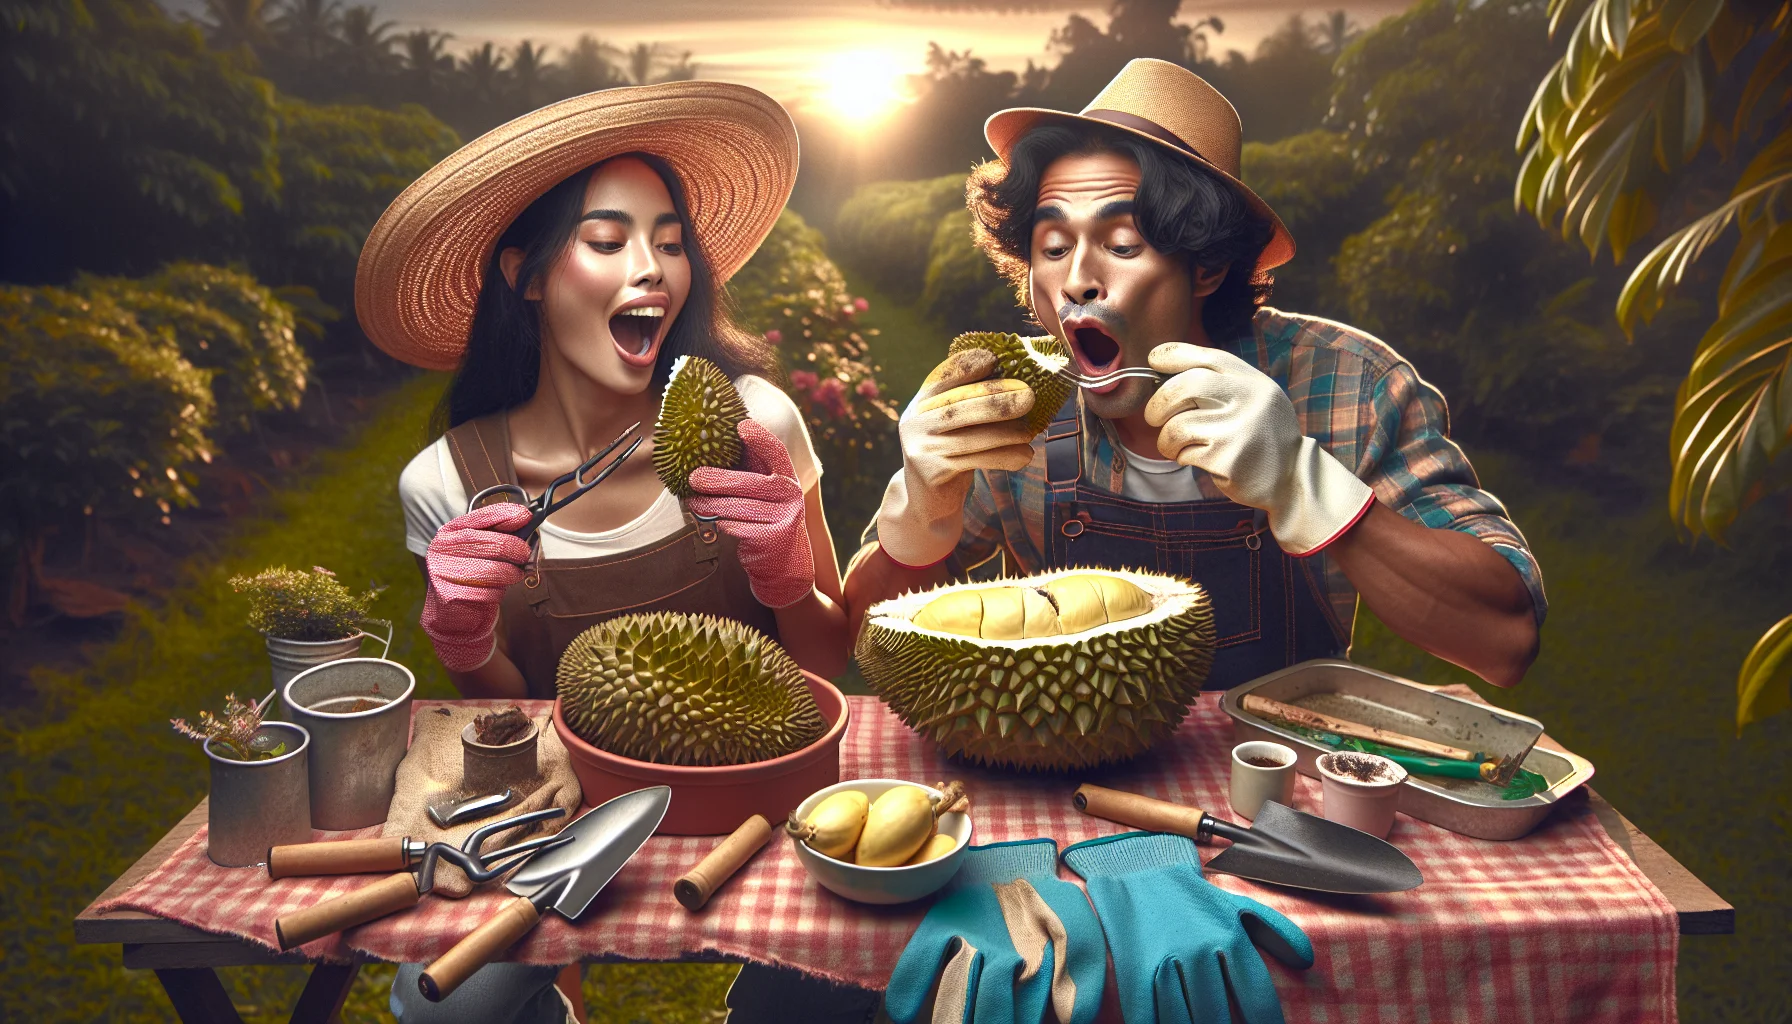 Create a whimsical, attention-grabbing scene of a Hispanic woman and a South Asian man having a picnic in a lush garden. Both are wearing gardening gloves and wide-brimmed hats, cherishing the fruits of their labor. The highlight of their feast is a freshly harvested durian fruit split in half. Their expressions are comically exaggerated as they take their first bite, vividly embodying the mix of trepidation and excitement. Accessories related to gardening are spread around the scene adding to the overall atmosphere. The setting sun in the background touches the scene with a soft, golden glow, making gardening look even more appealing.